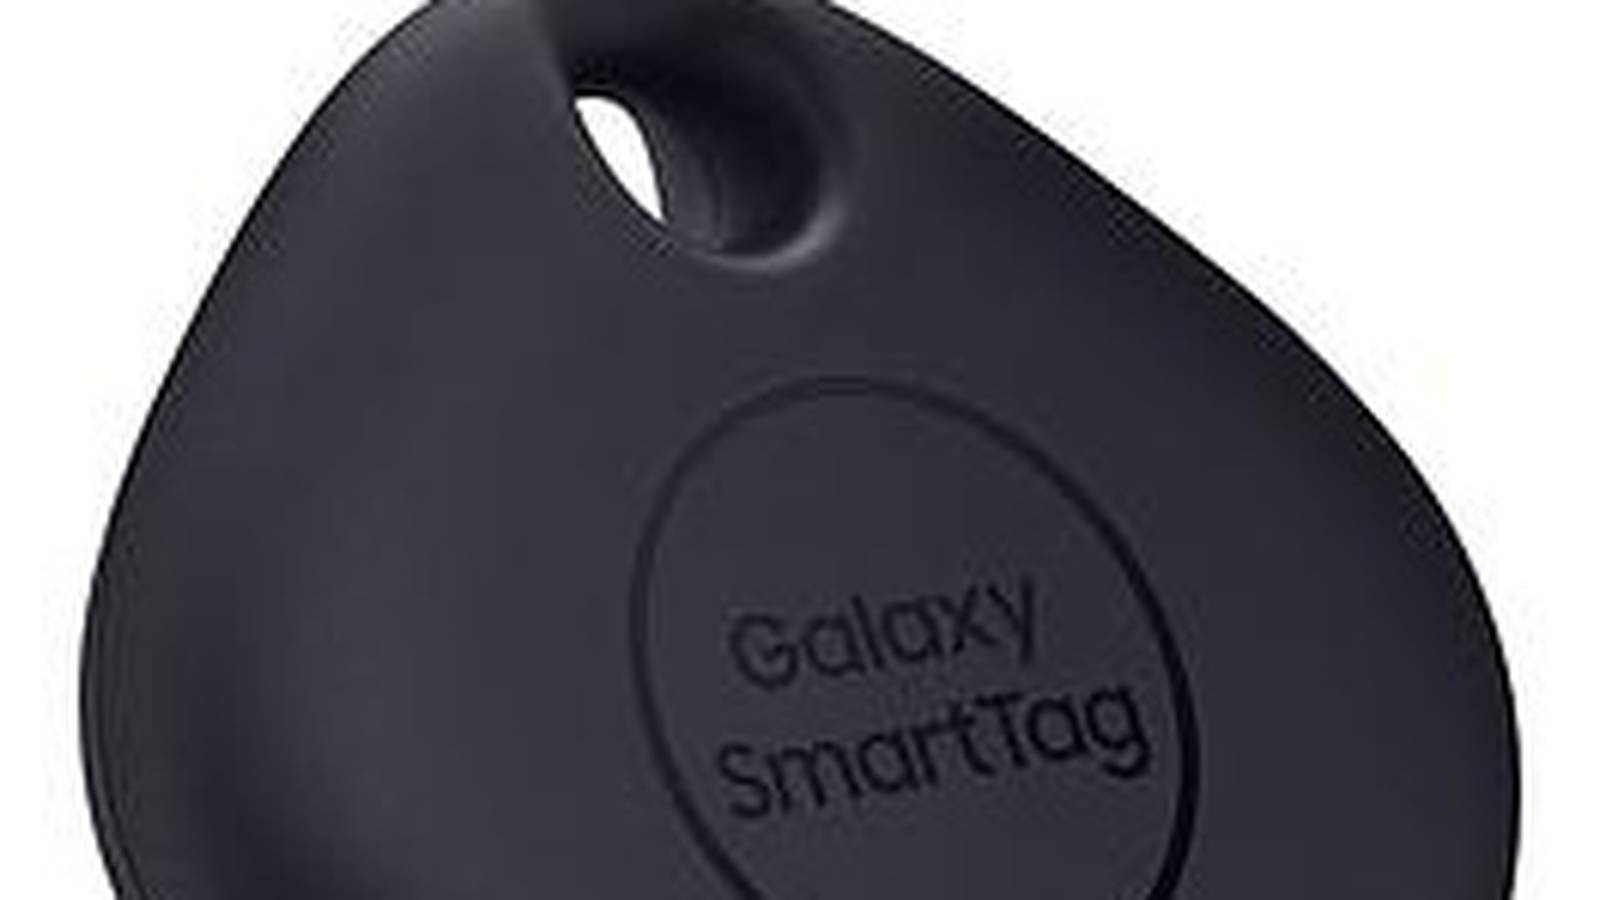 The Smart Tag Explained / Samsung Galaxy SmartTag Review! 